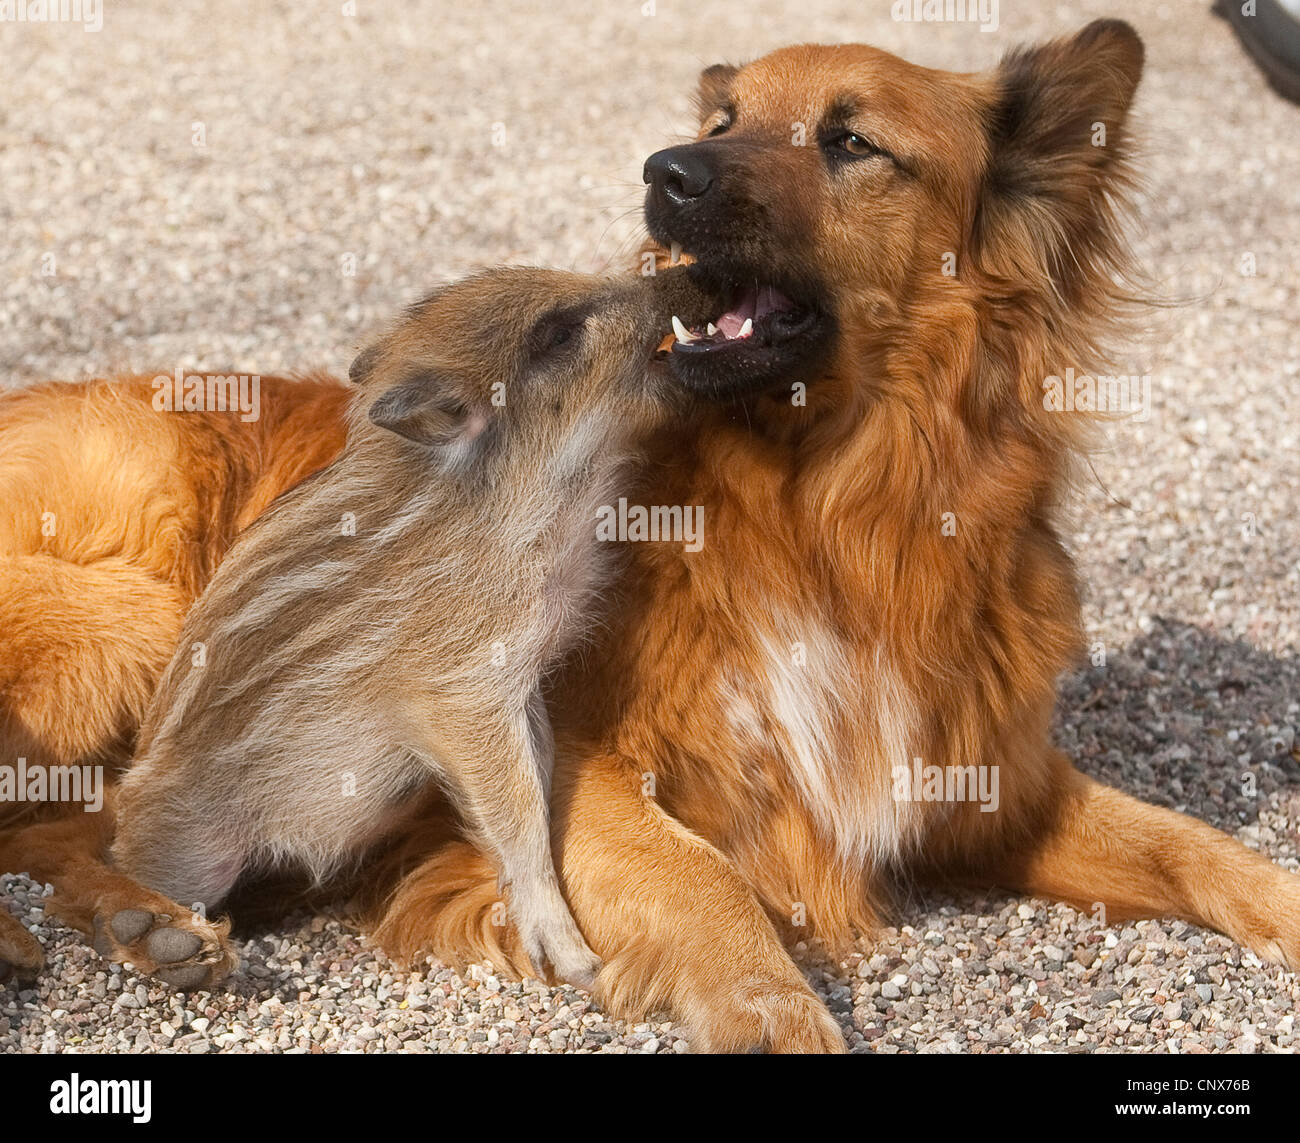 wild boar, pig, wild boar (Sus scrofa), piglet playing with a dog, Germany Stock Photo